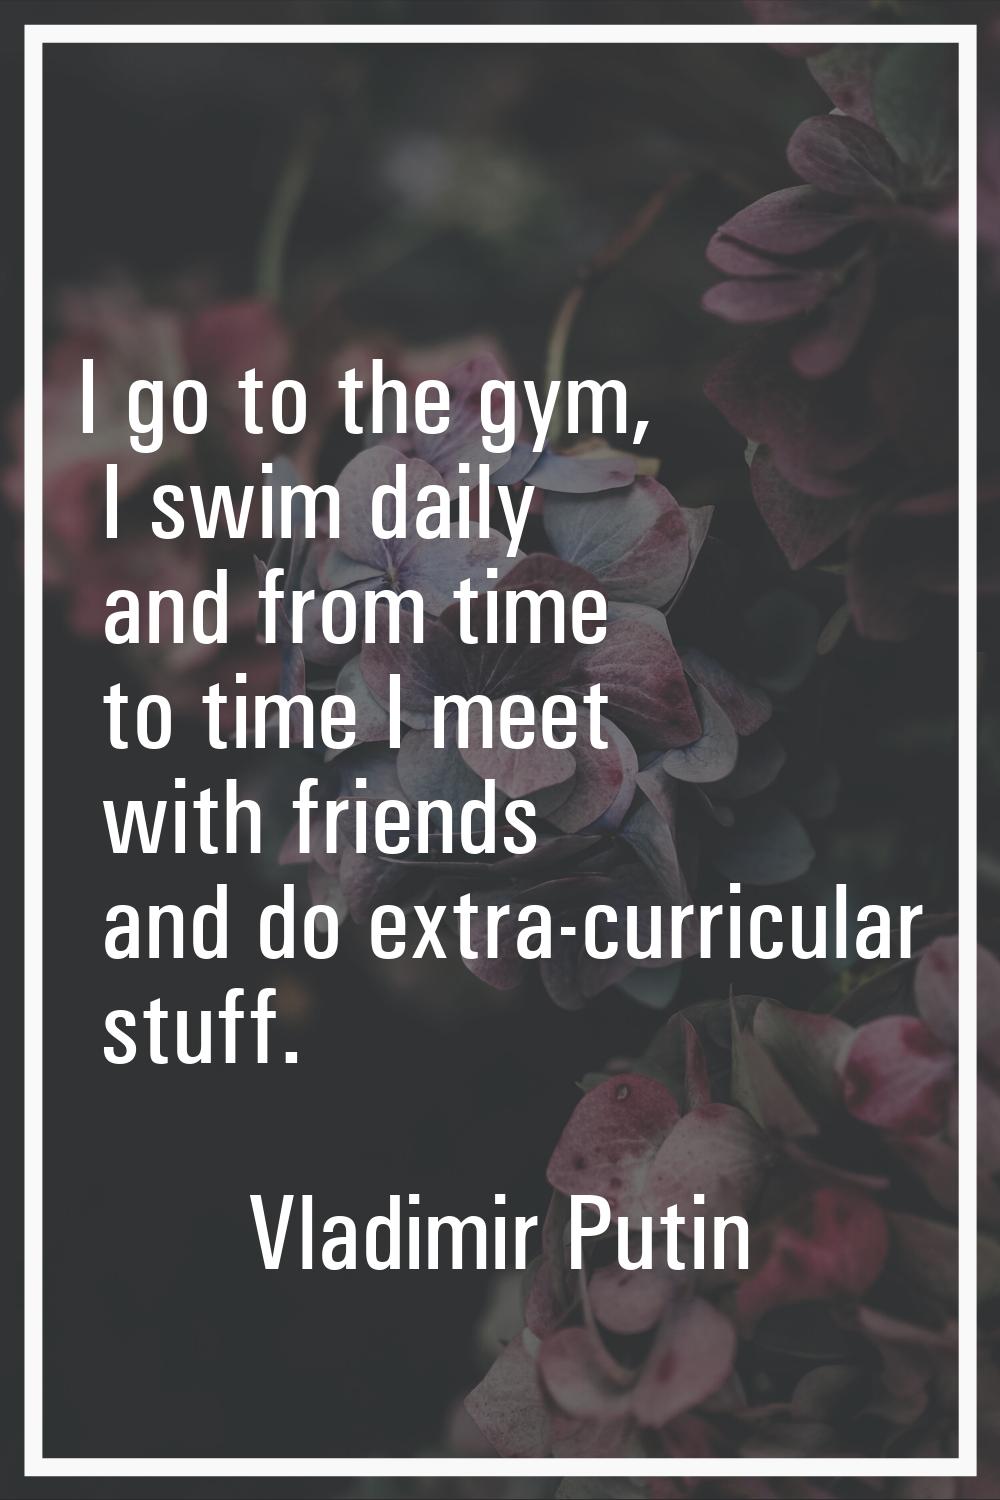 I go to the gym, I swim daily and from time to time I meet with friends and do extra-curricular stu